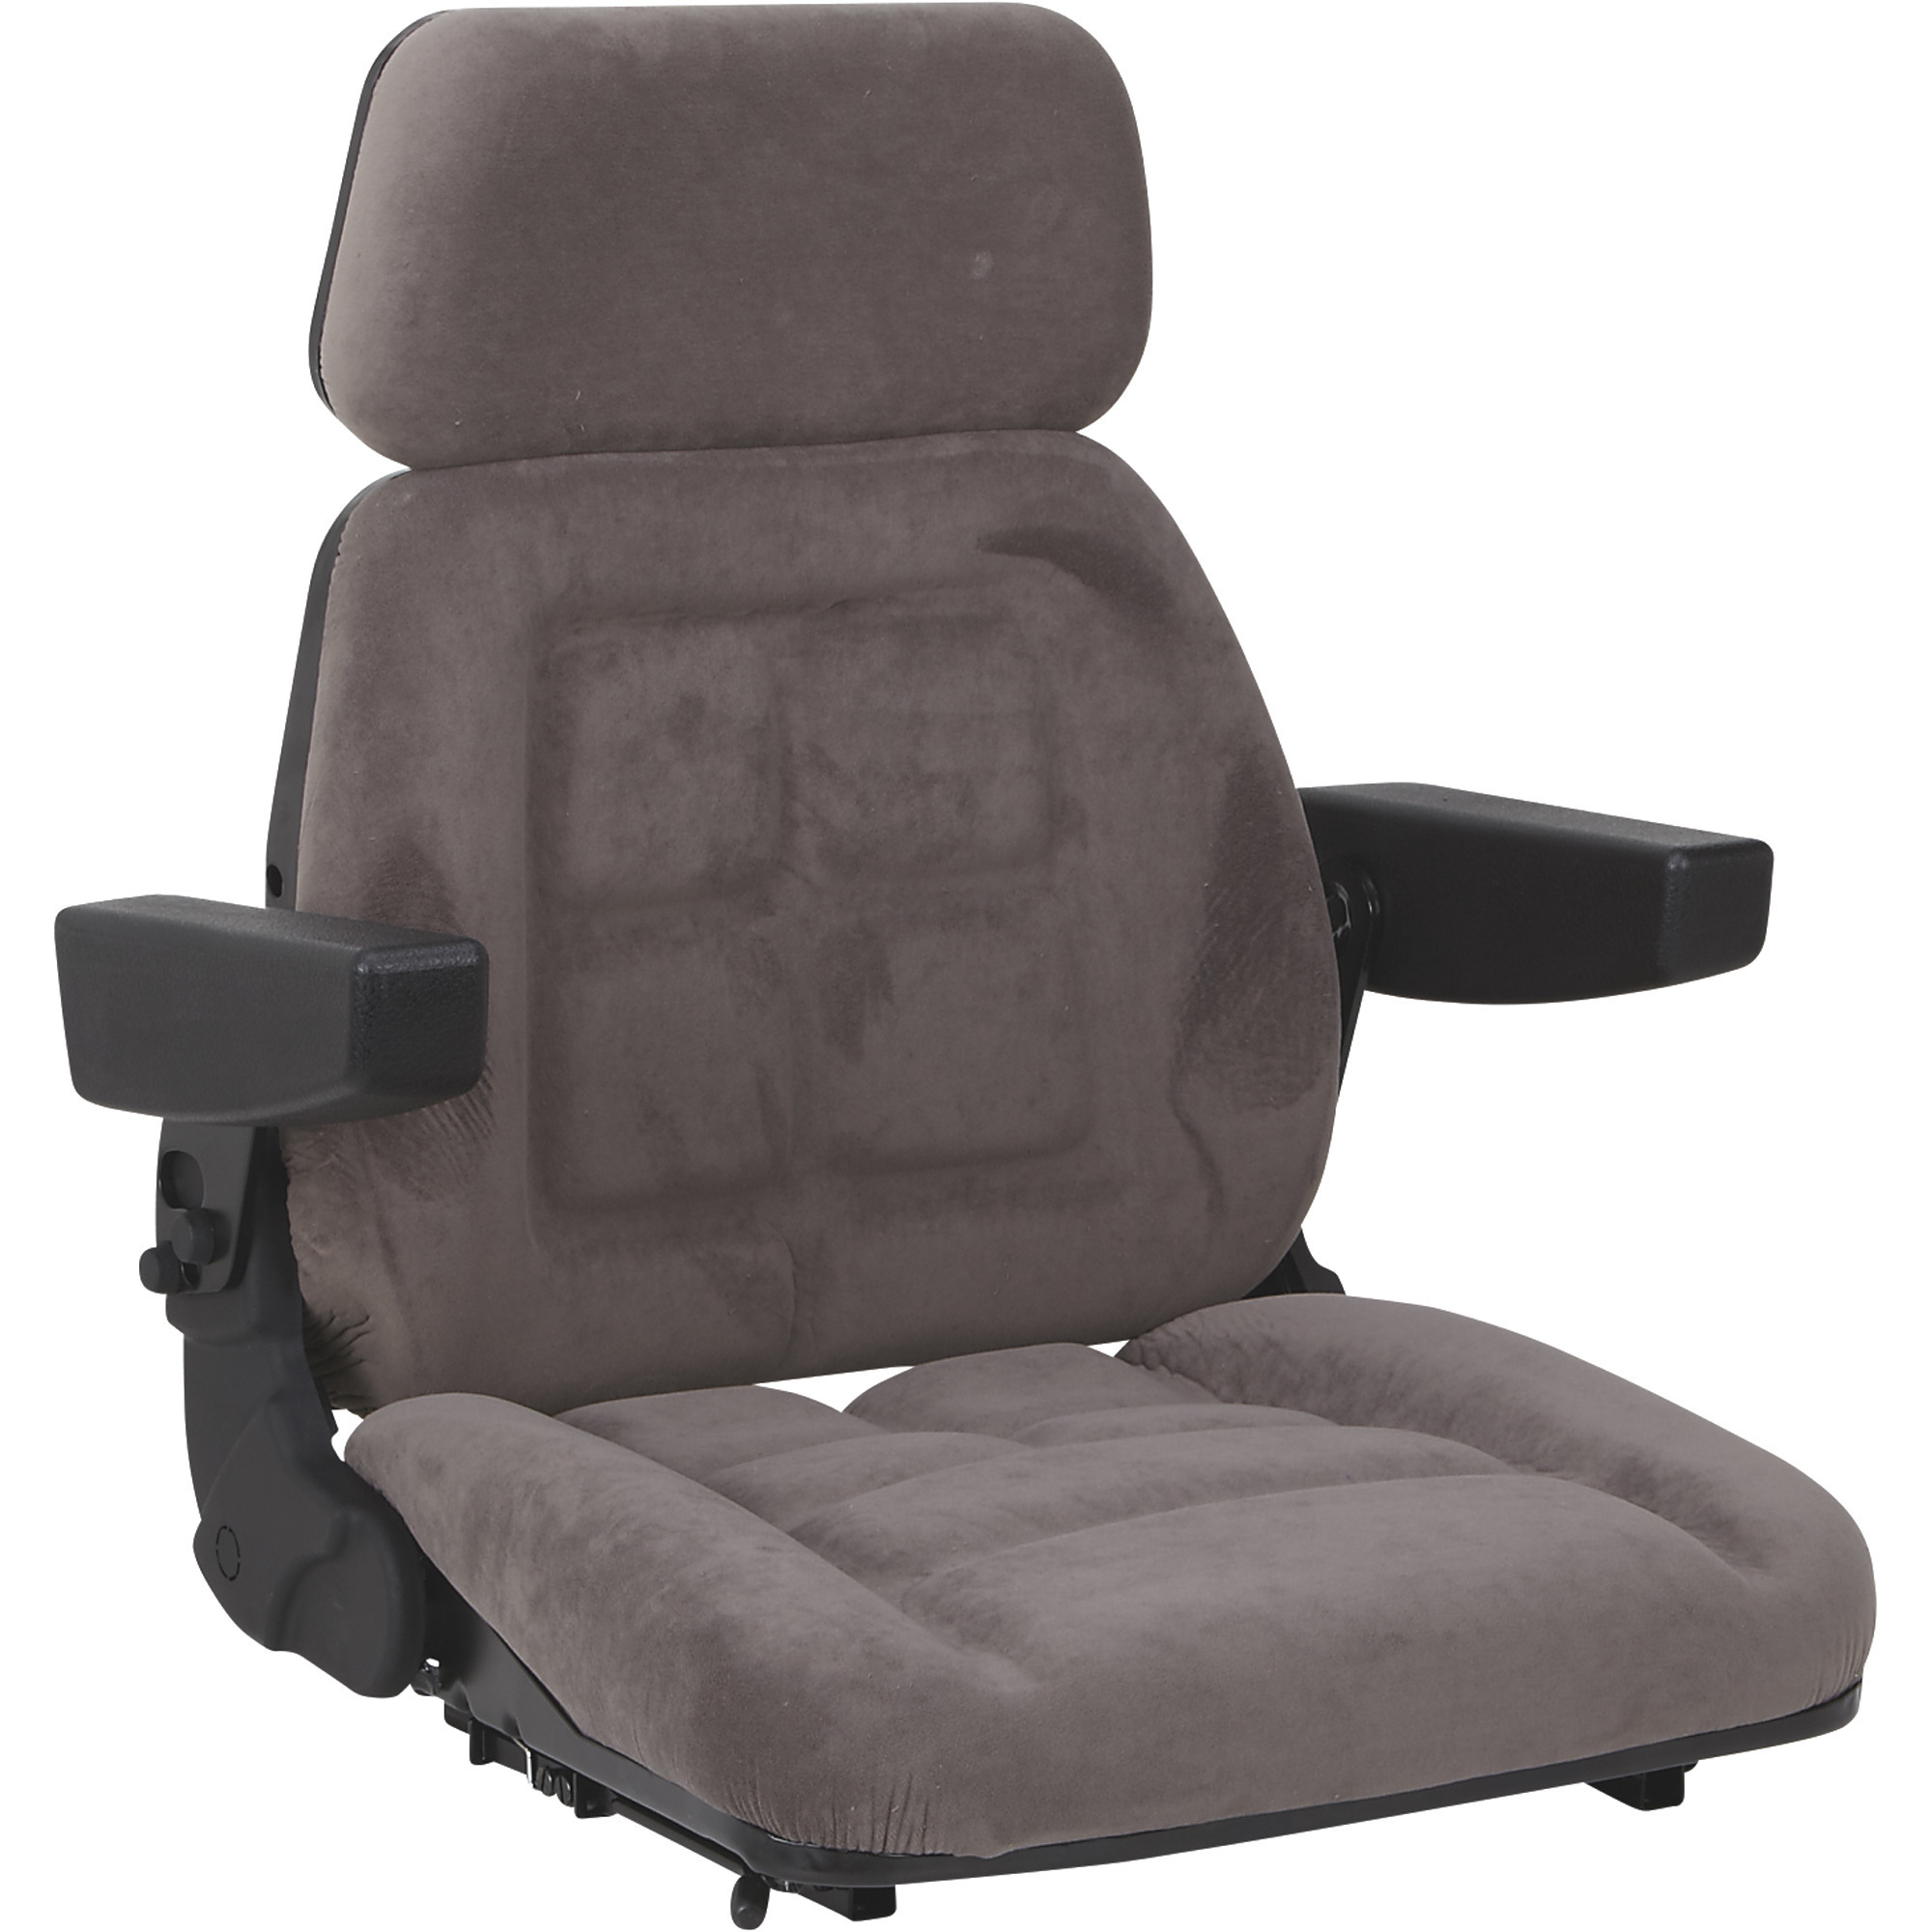 Pilot Brand Fabric Seat Top Replacement for Grammer MSG95 Suspension Tractor Seat, Gray, Model 7616